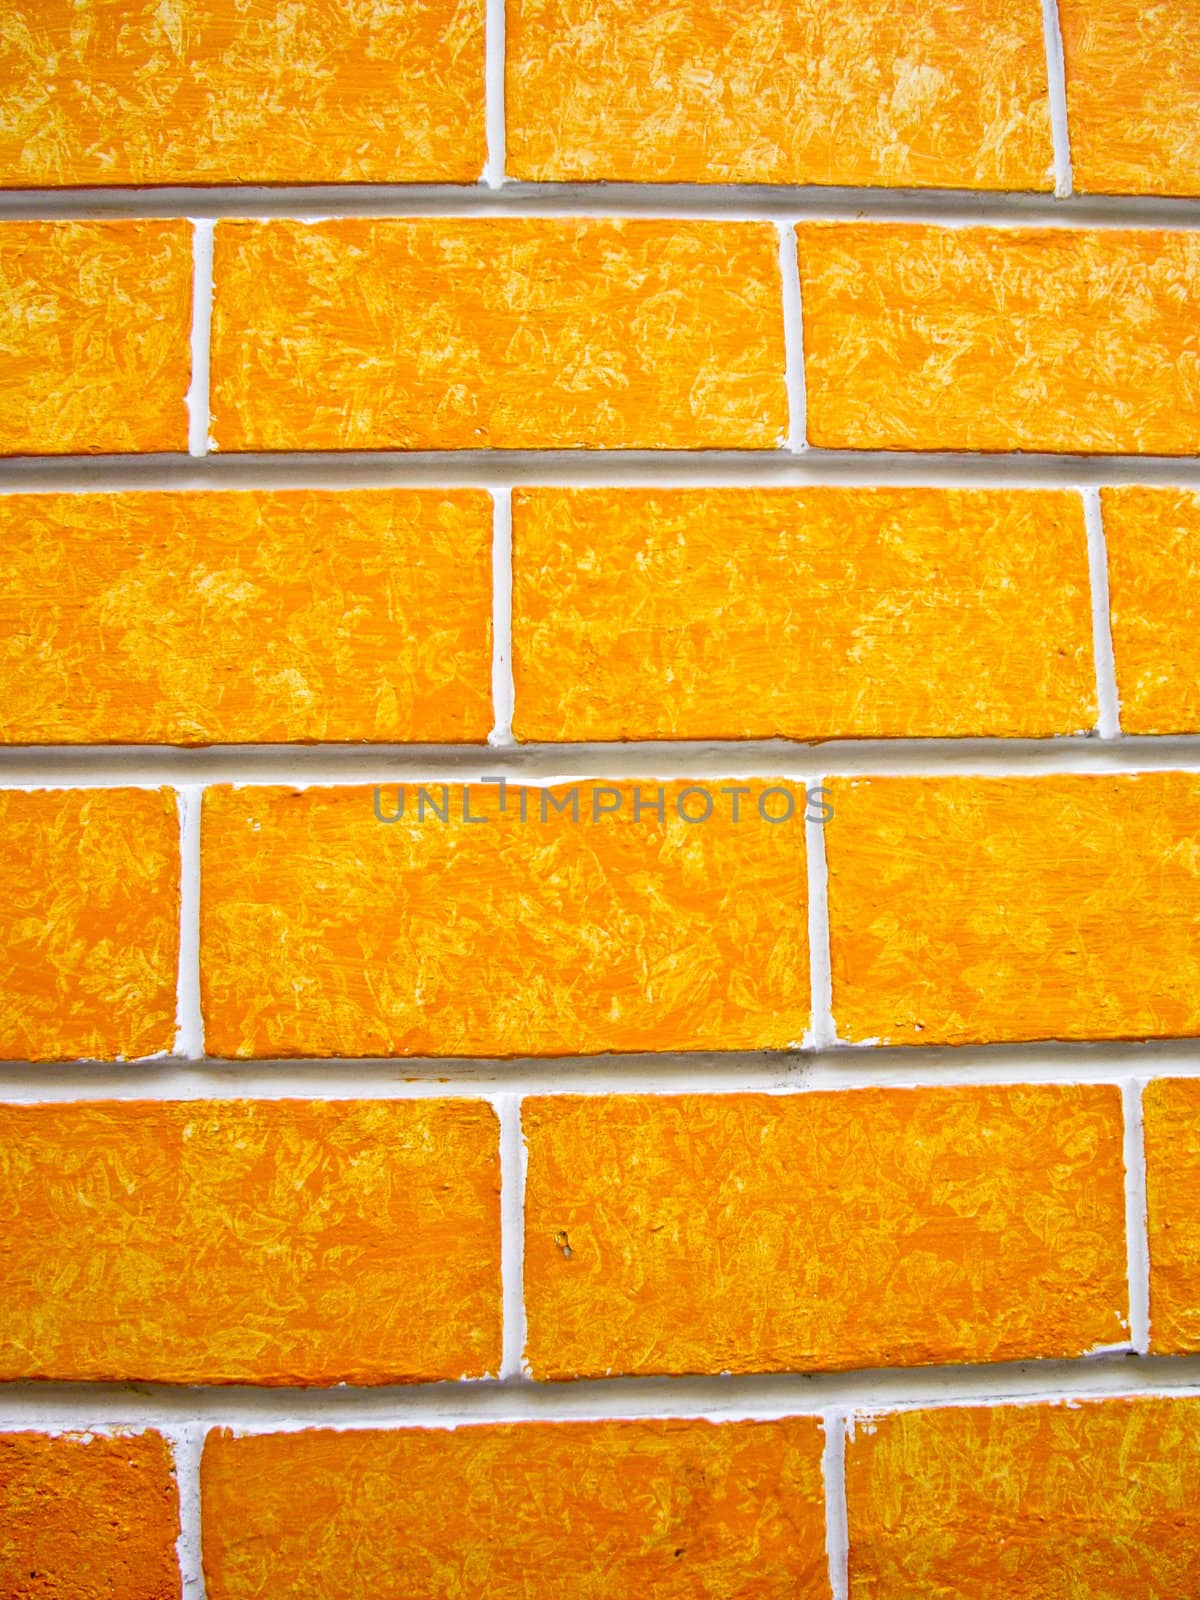 Orange patterened walls in Mexico